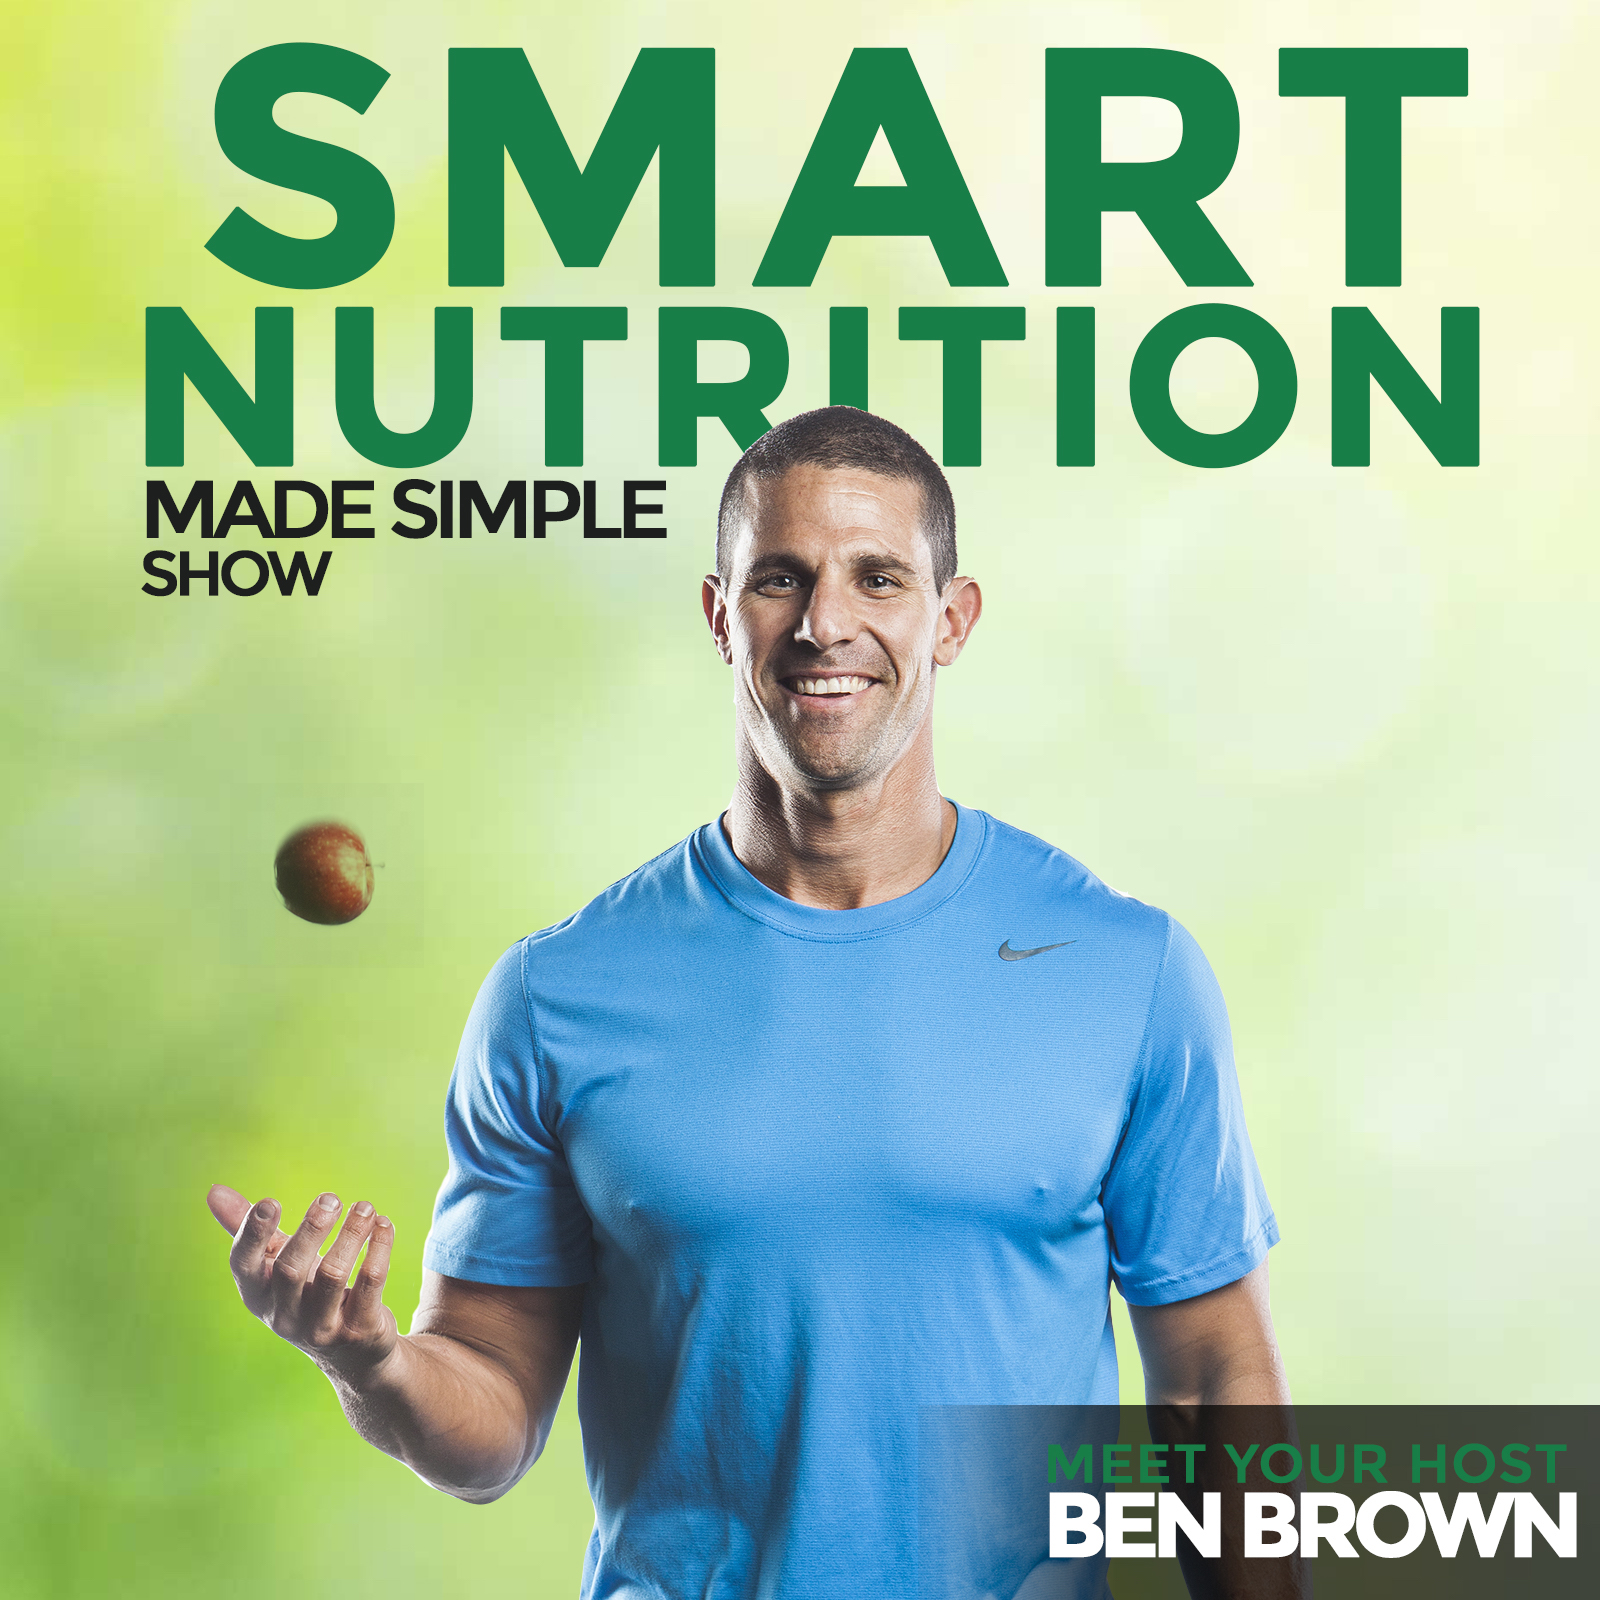 The Smart Nutrition Made Simple Show with Ben Brown